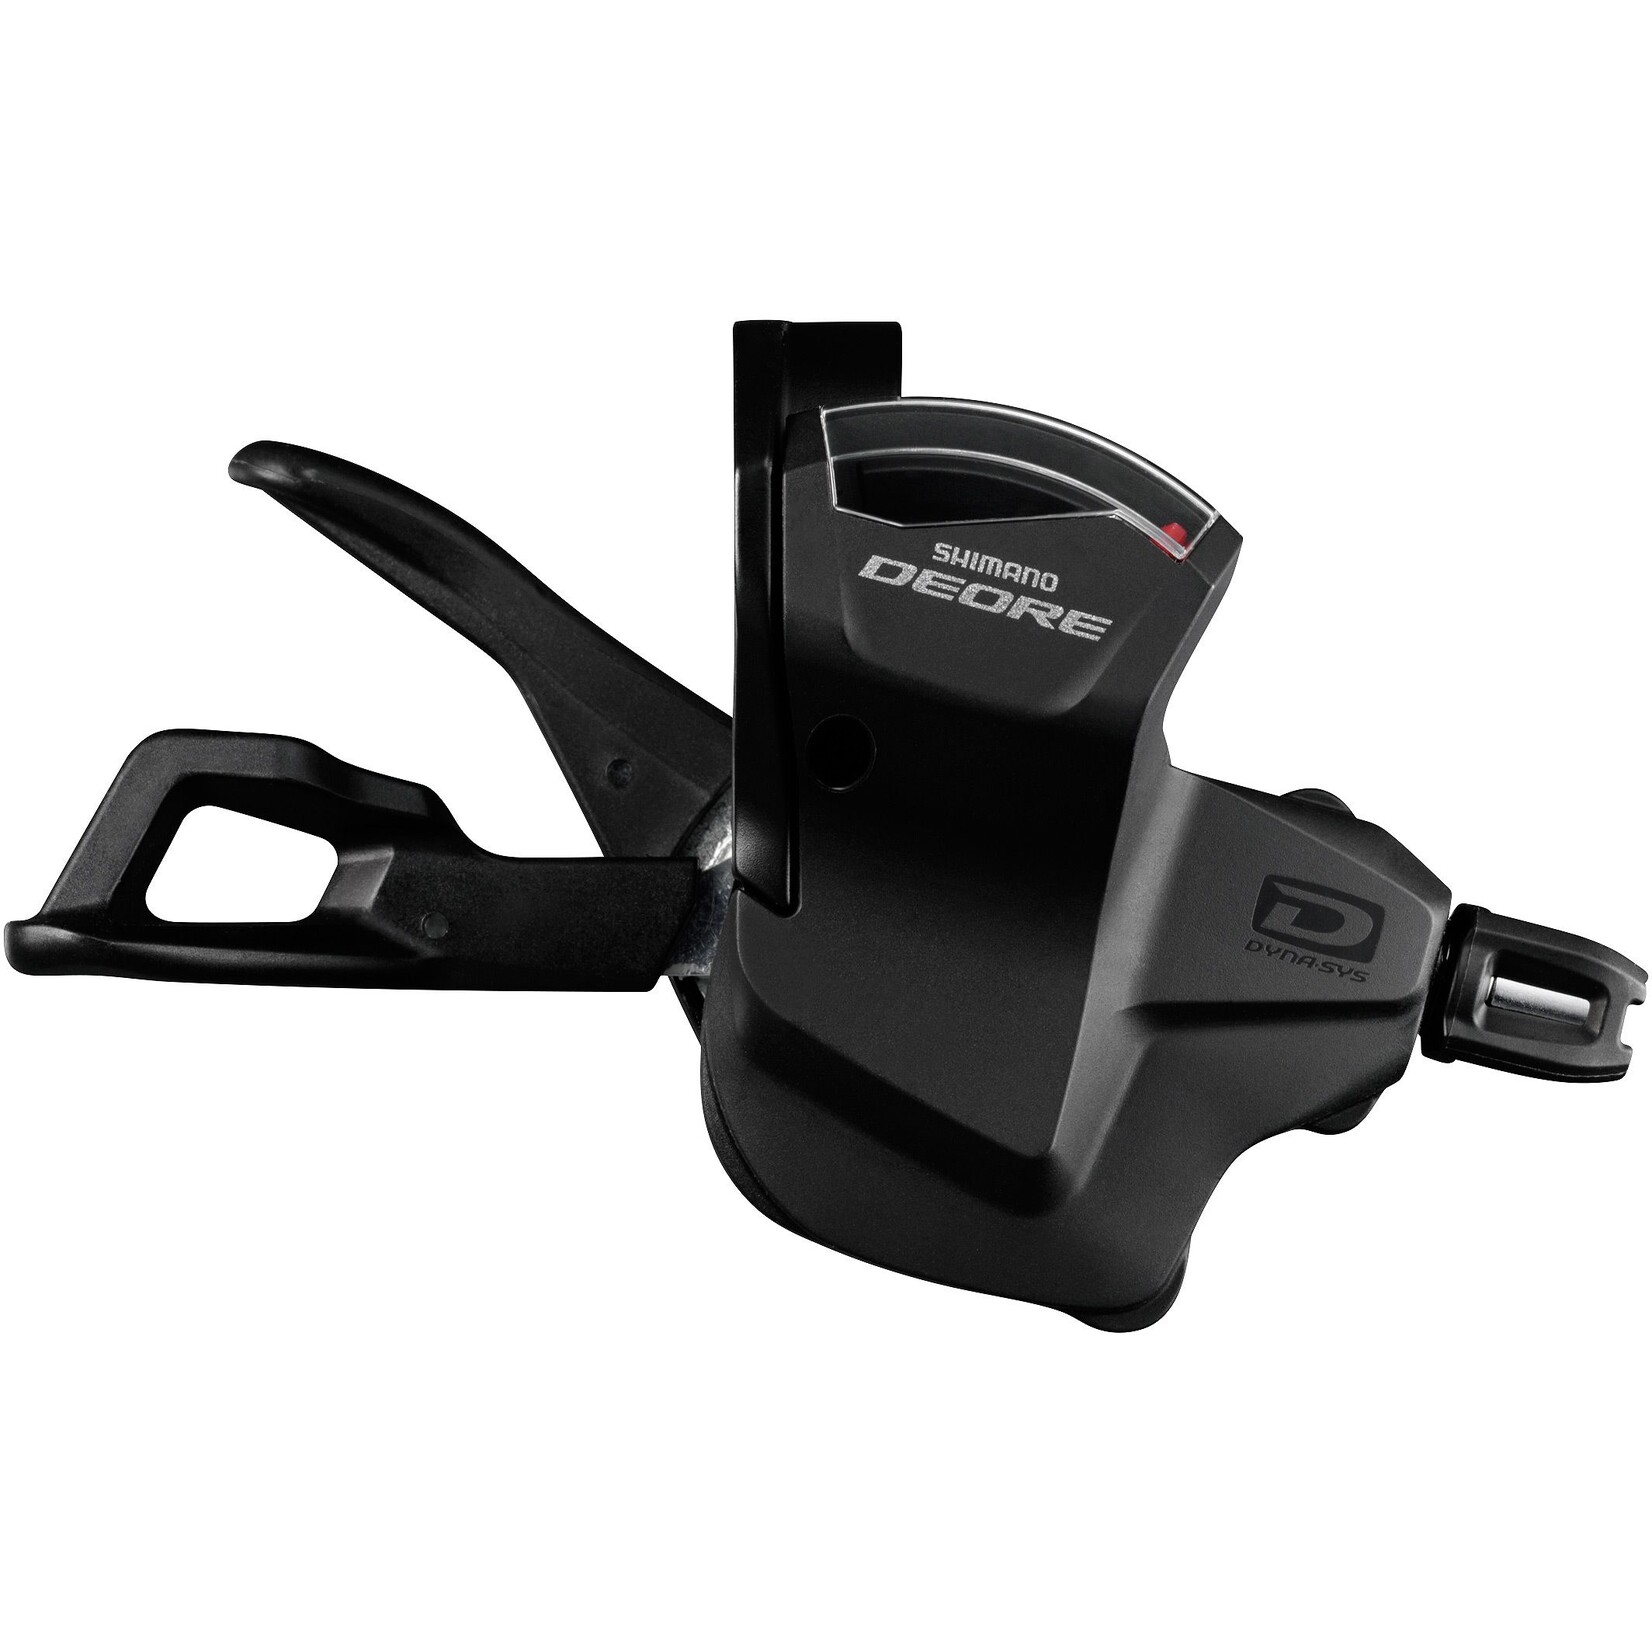 SHIMANO Shimano SL-M6000 Deore shift lever, band-on, 10-speed, right hand